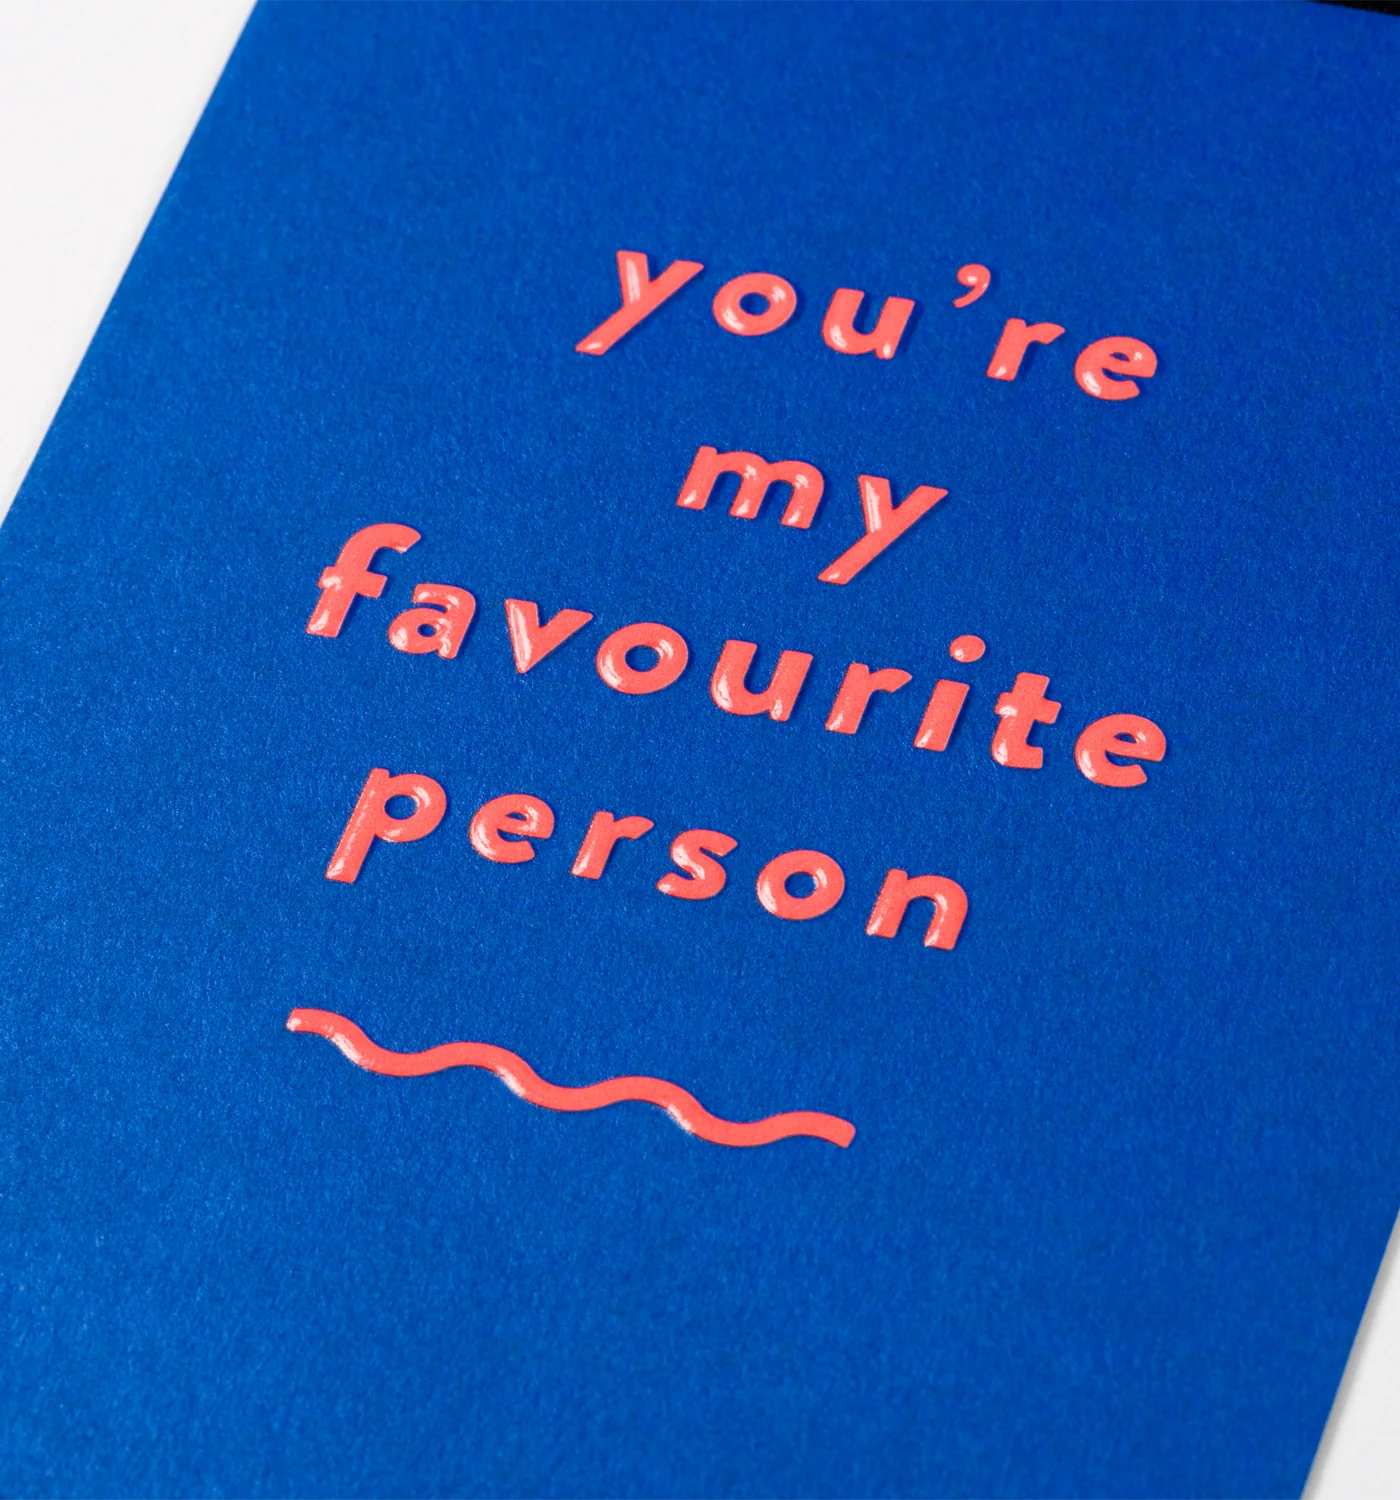 Fabulous Gifts Cher Favourite Person Mini Card by Weirs of Baggot Street